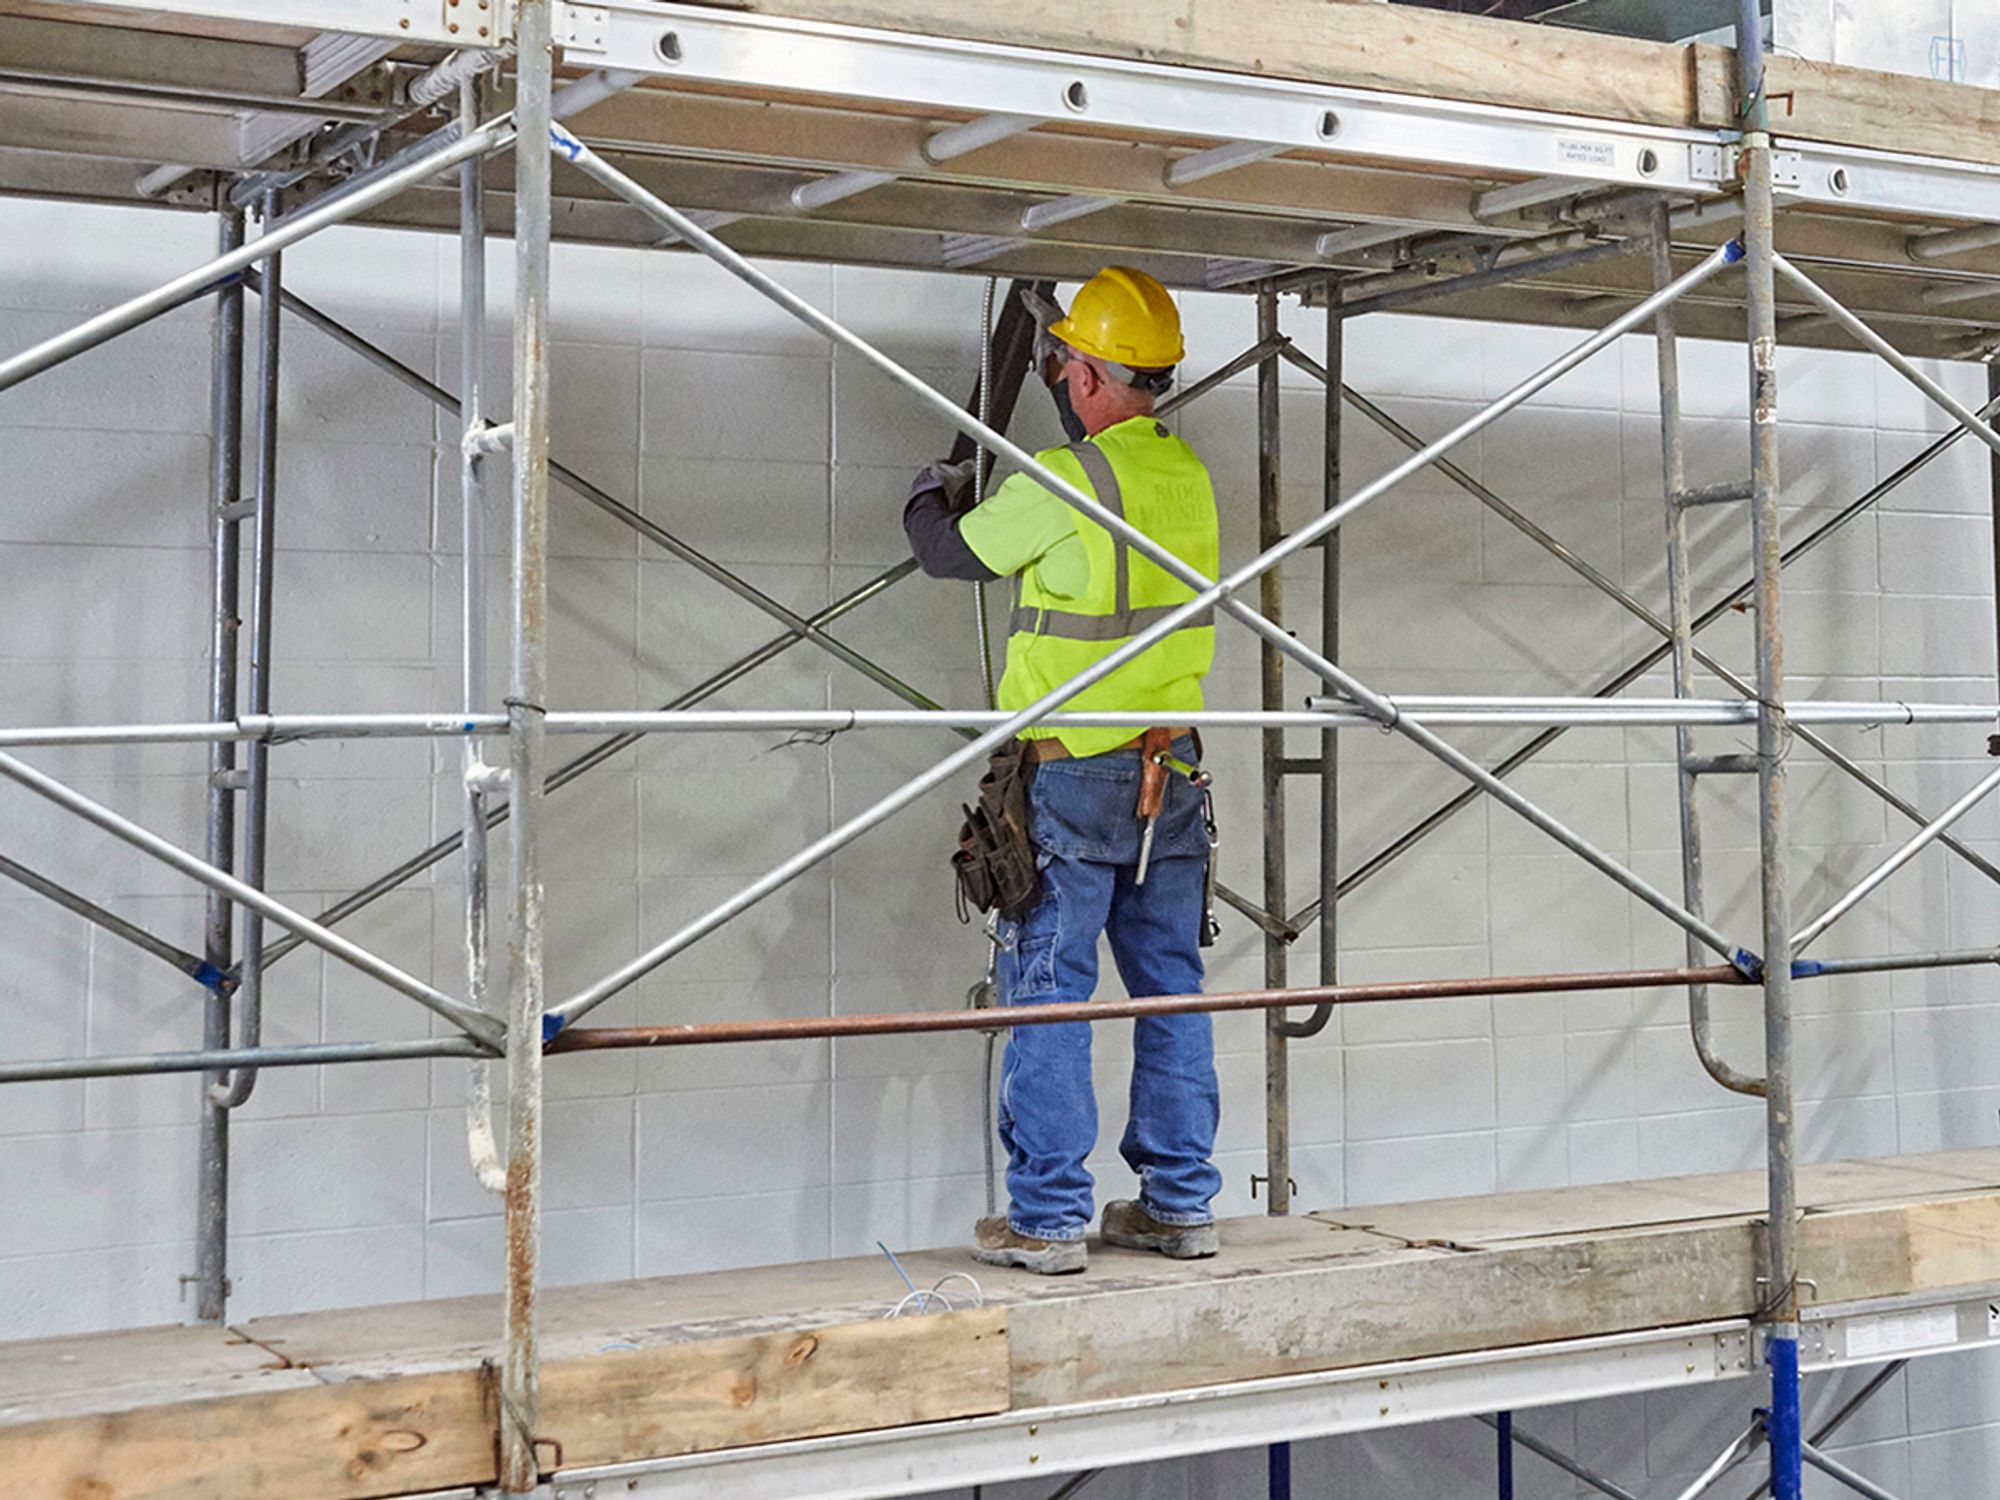 Scaffolding in general industry and construction